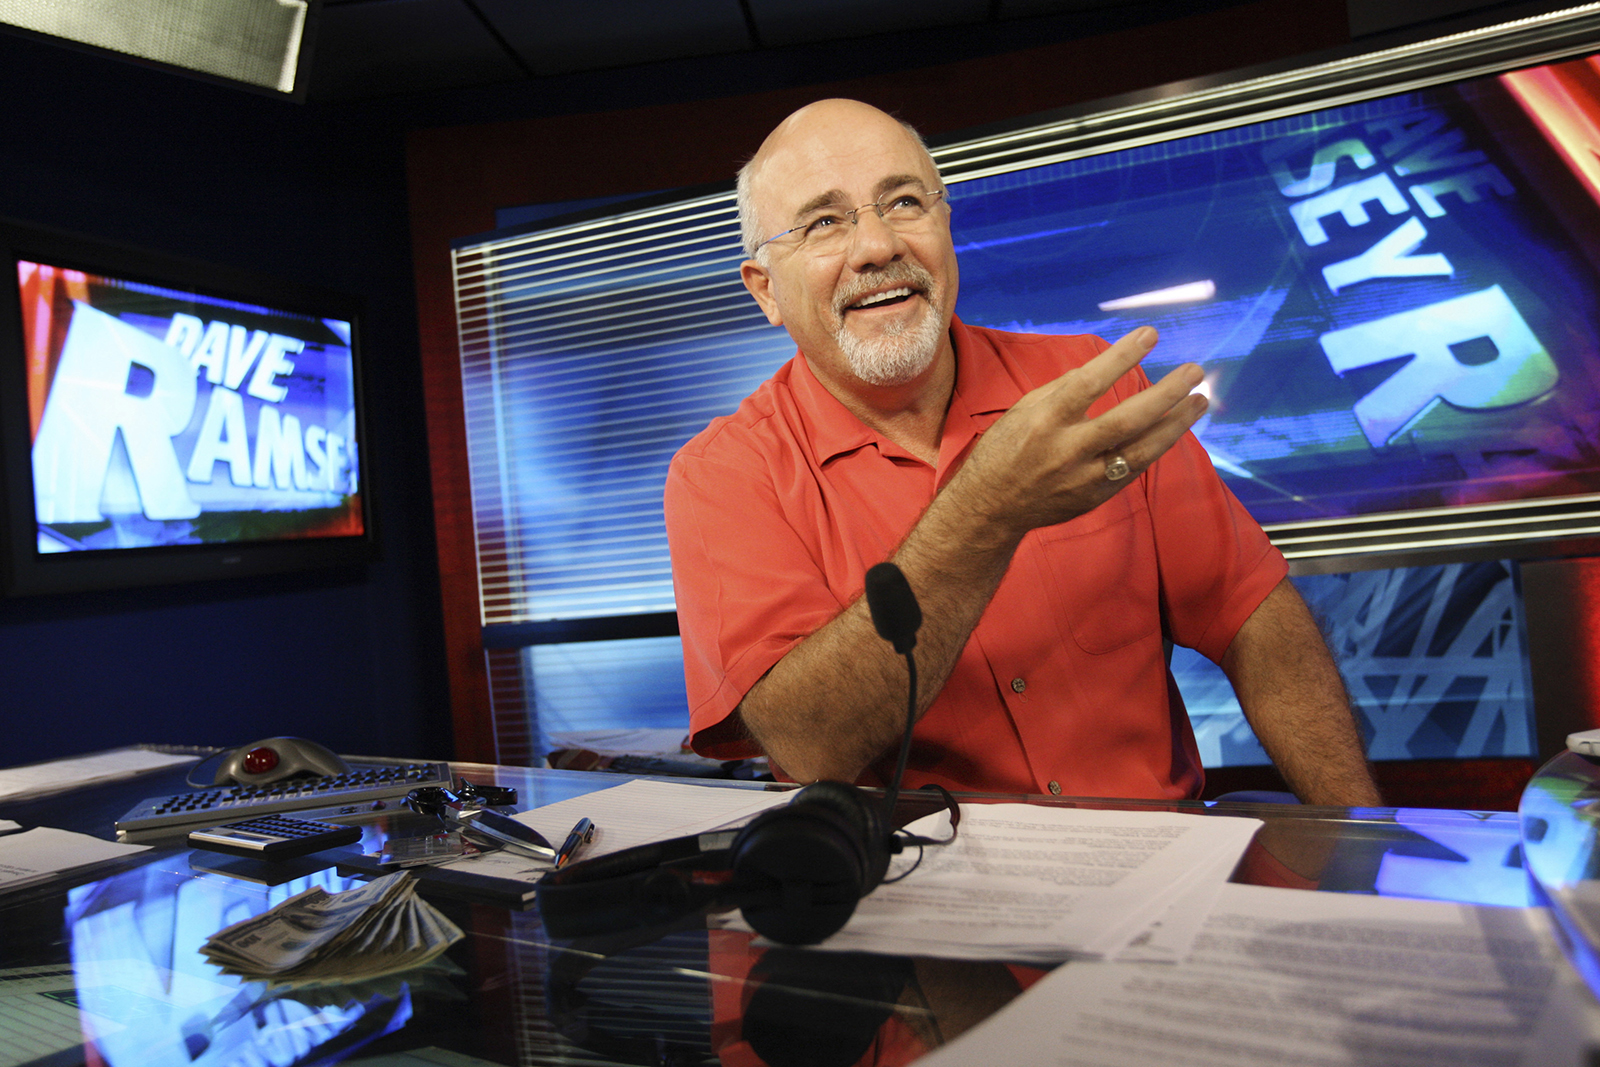 In this July 29, 2009, file photo, financial guru Dave Ramsey sits in his broadcasting studio in Brentwood, Tenn. Ramsey Solutions later moved to a new corporate headquarters in Franklin. (AP Photo/Josh Anderson, File)